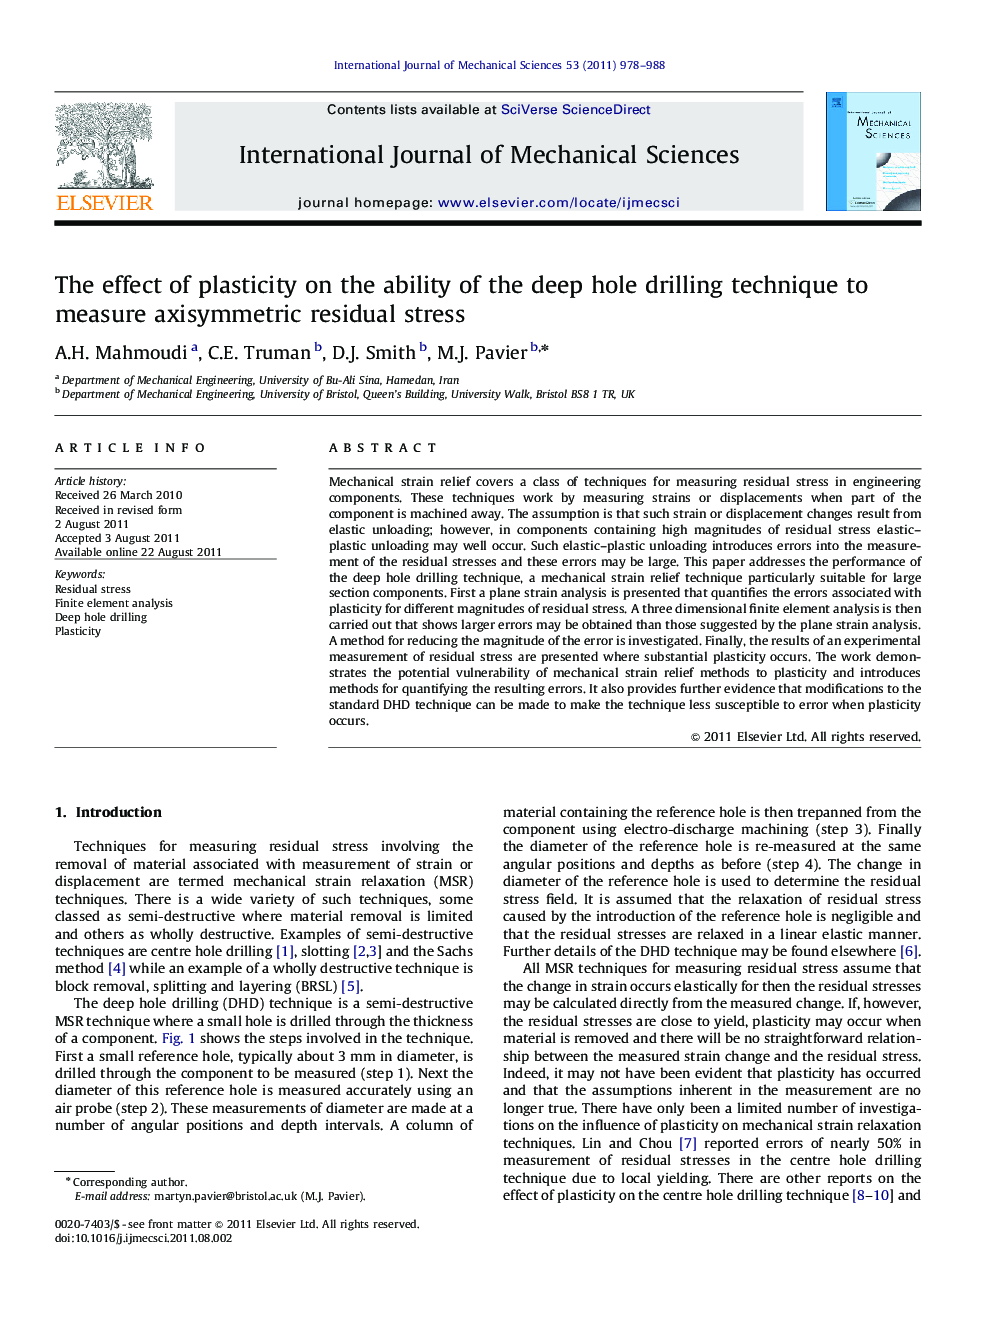 The effect of plasticity on the ability of the deep hole drilling technique to measure axisymmetric residual stress